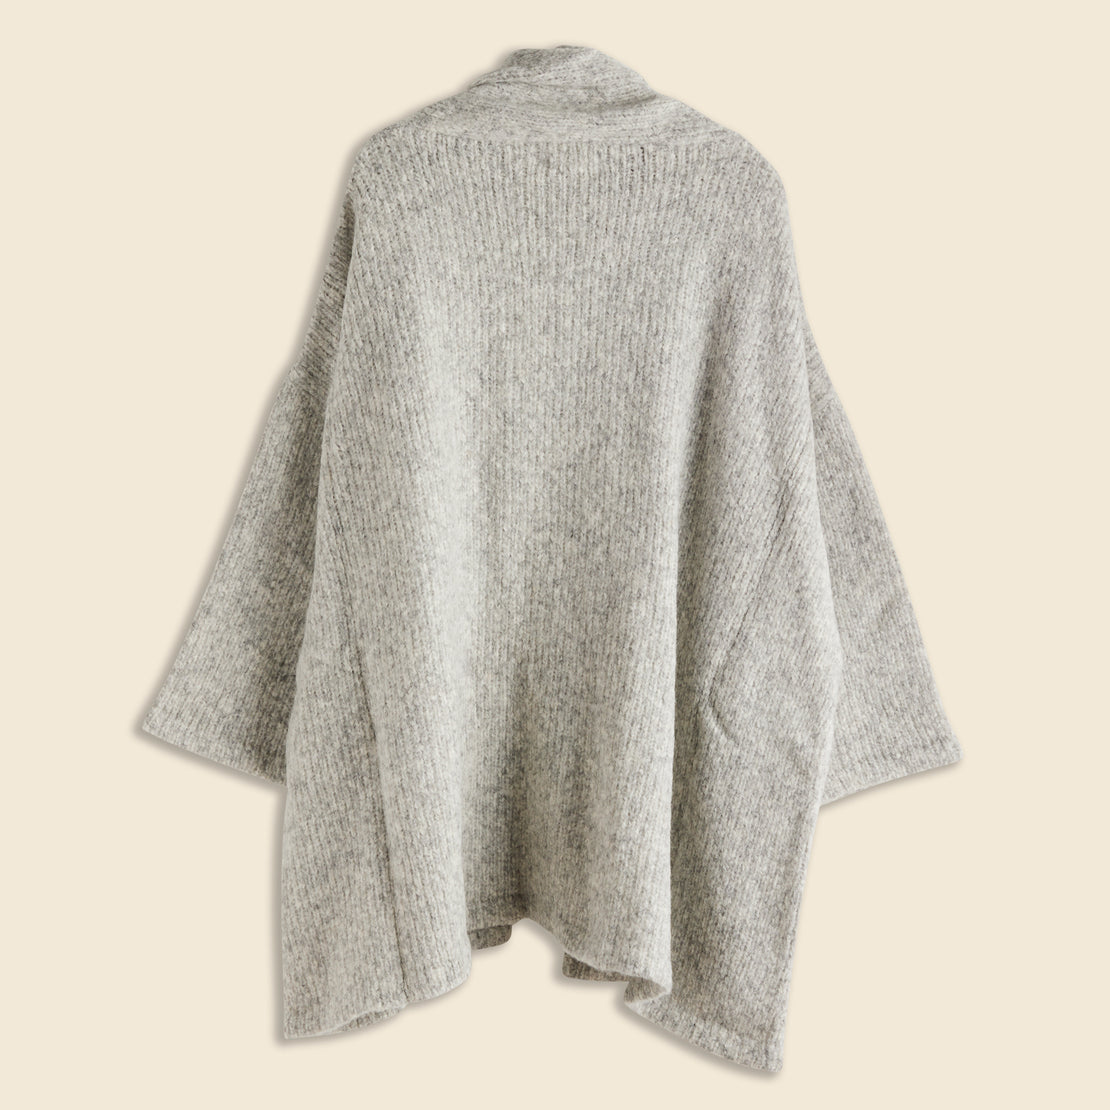 Haori Sweater Coat - Watery Sky - Atelier Delphine - STAG Provisions - W - Tops - Sweater